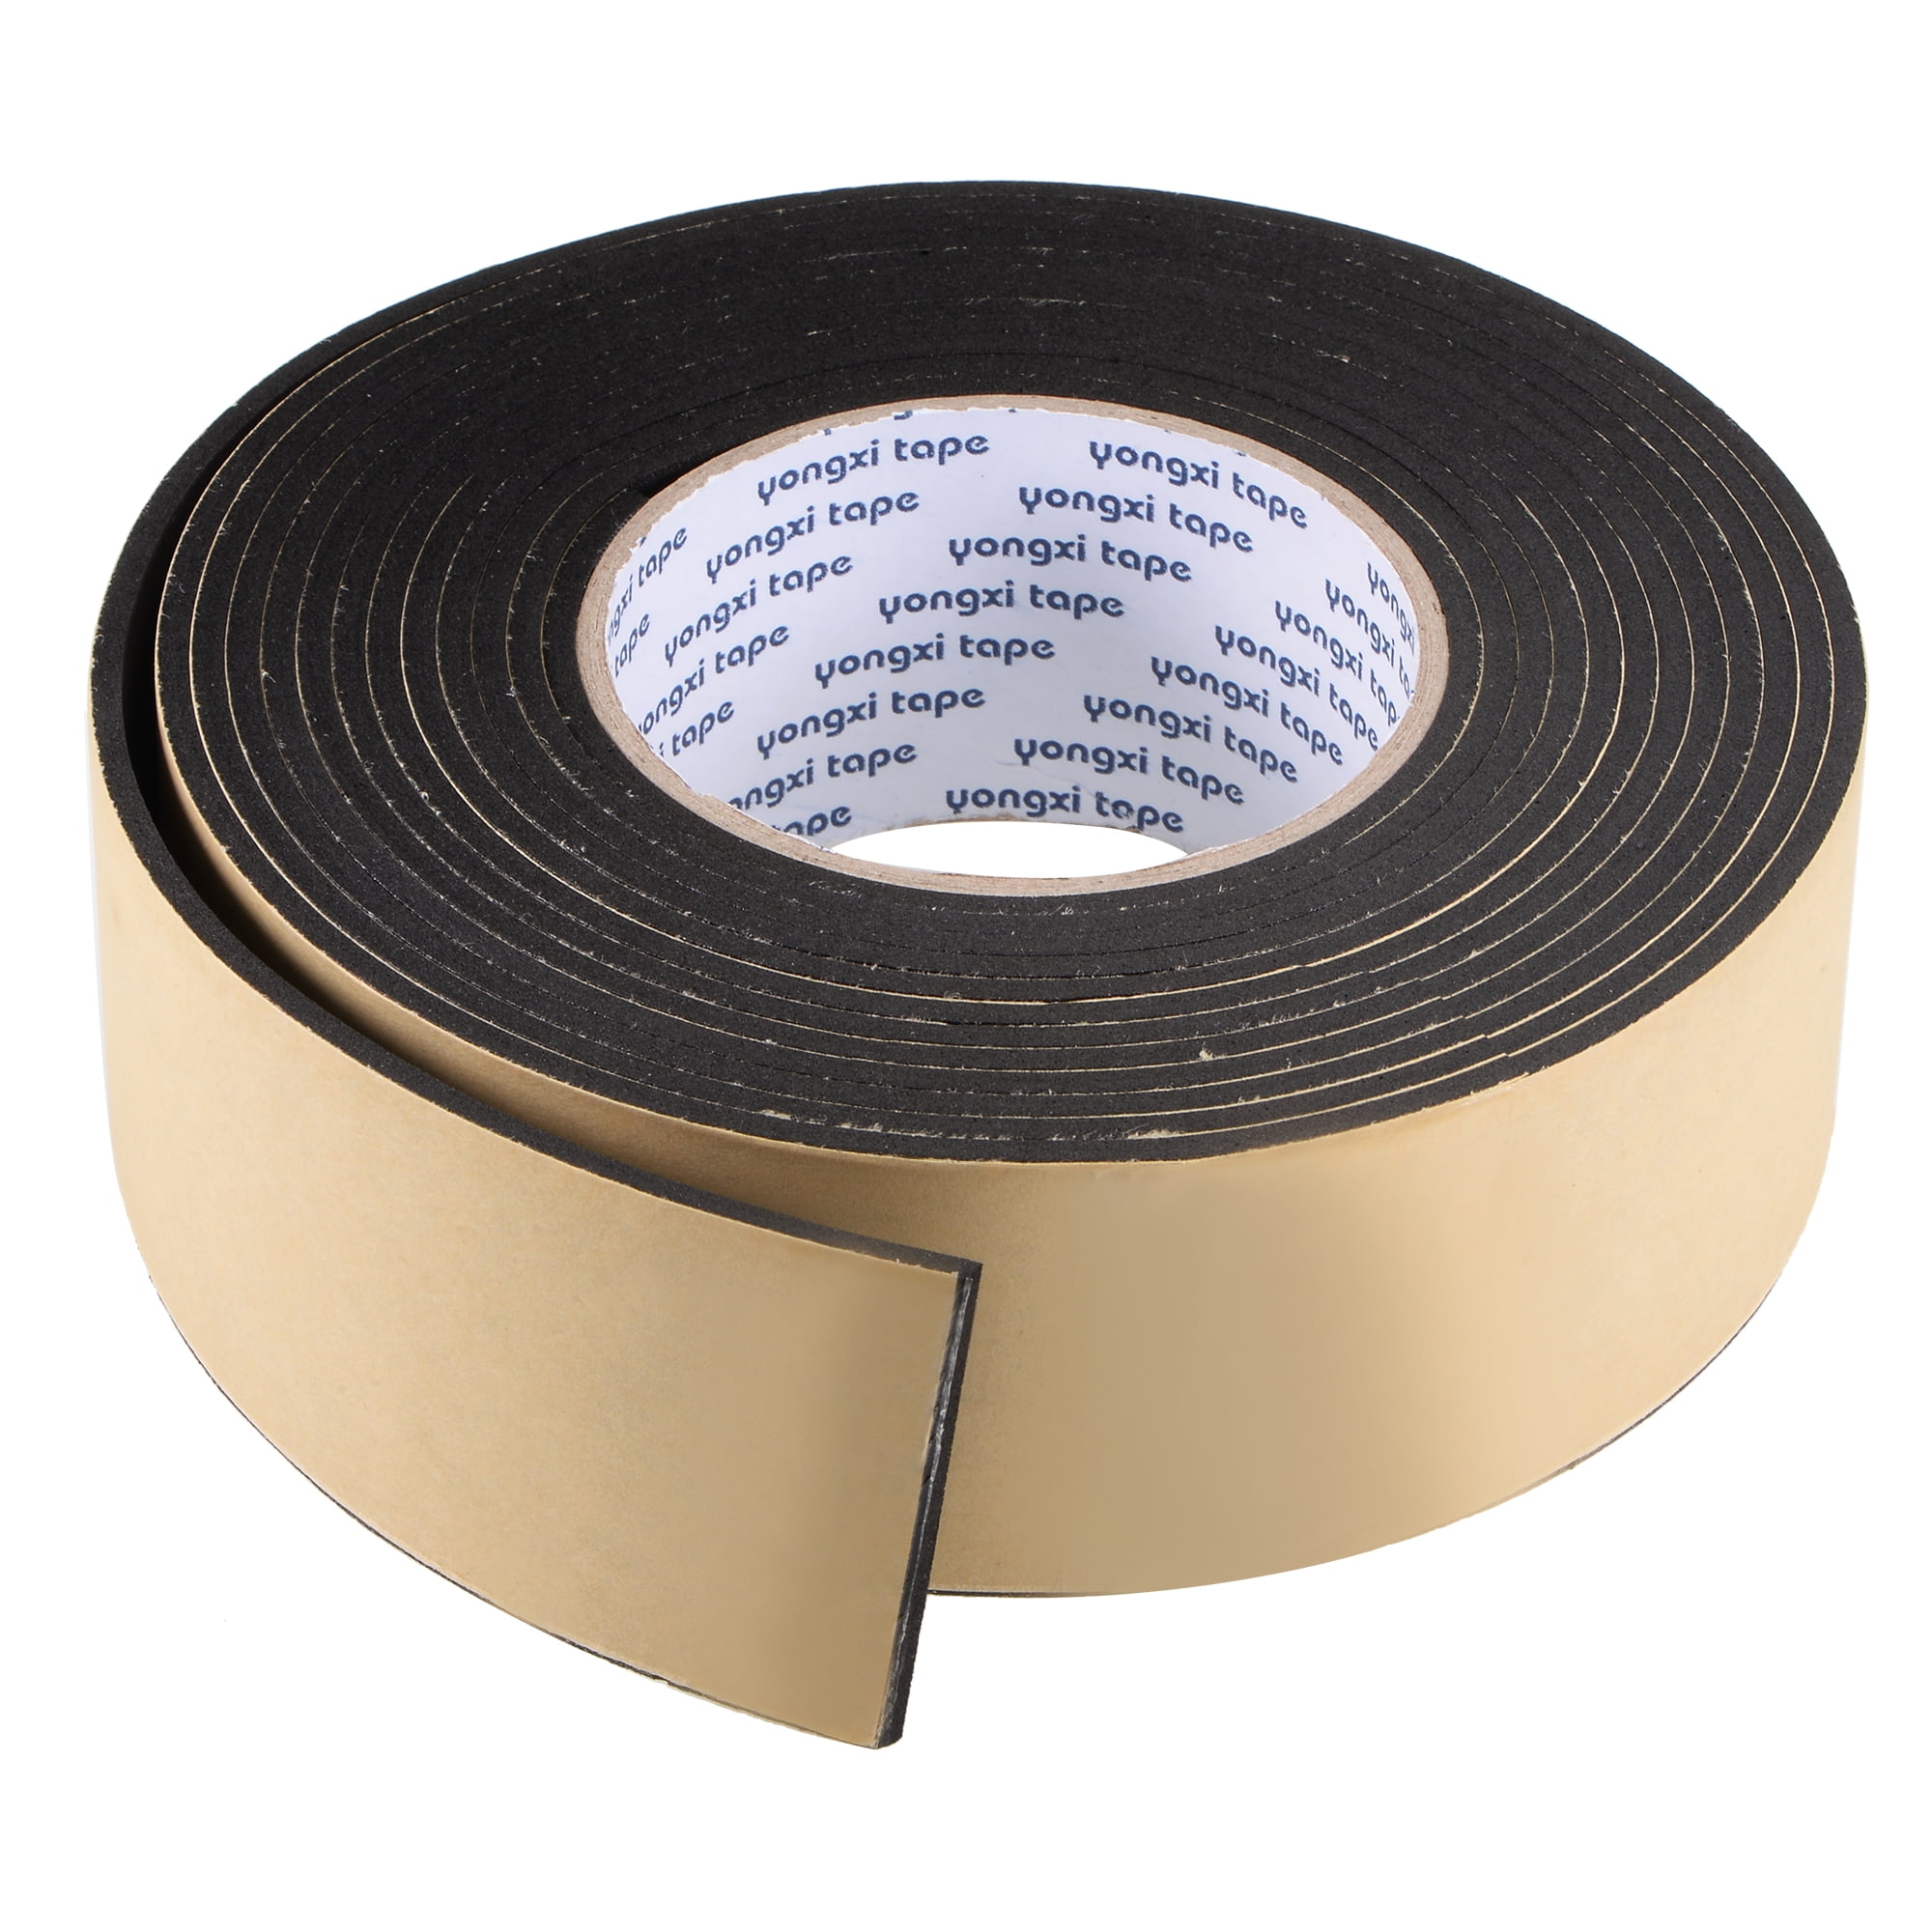 Uxcell 40 x 40 x 3mm Eva Foam Square Double Sided Sticky Pads Adhesive Tape Black 100 Pack